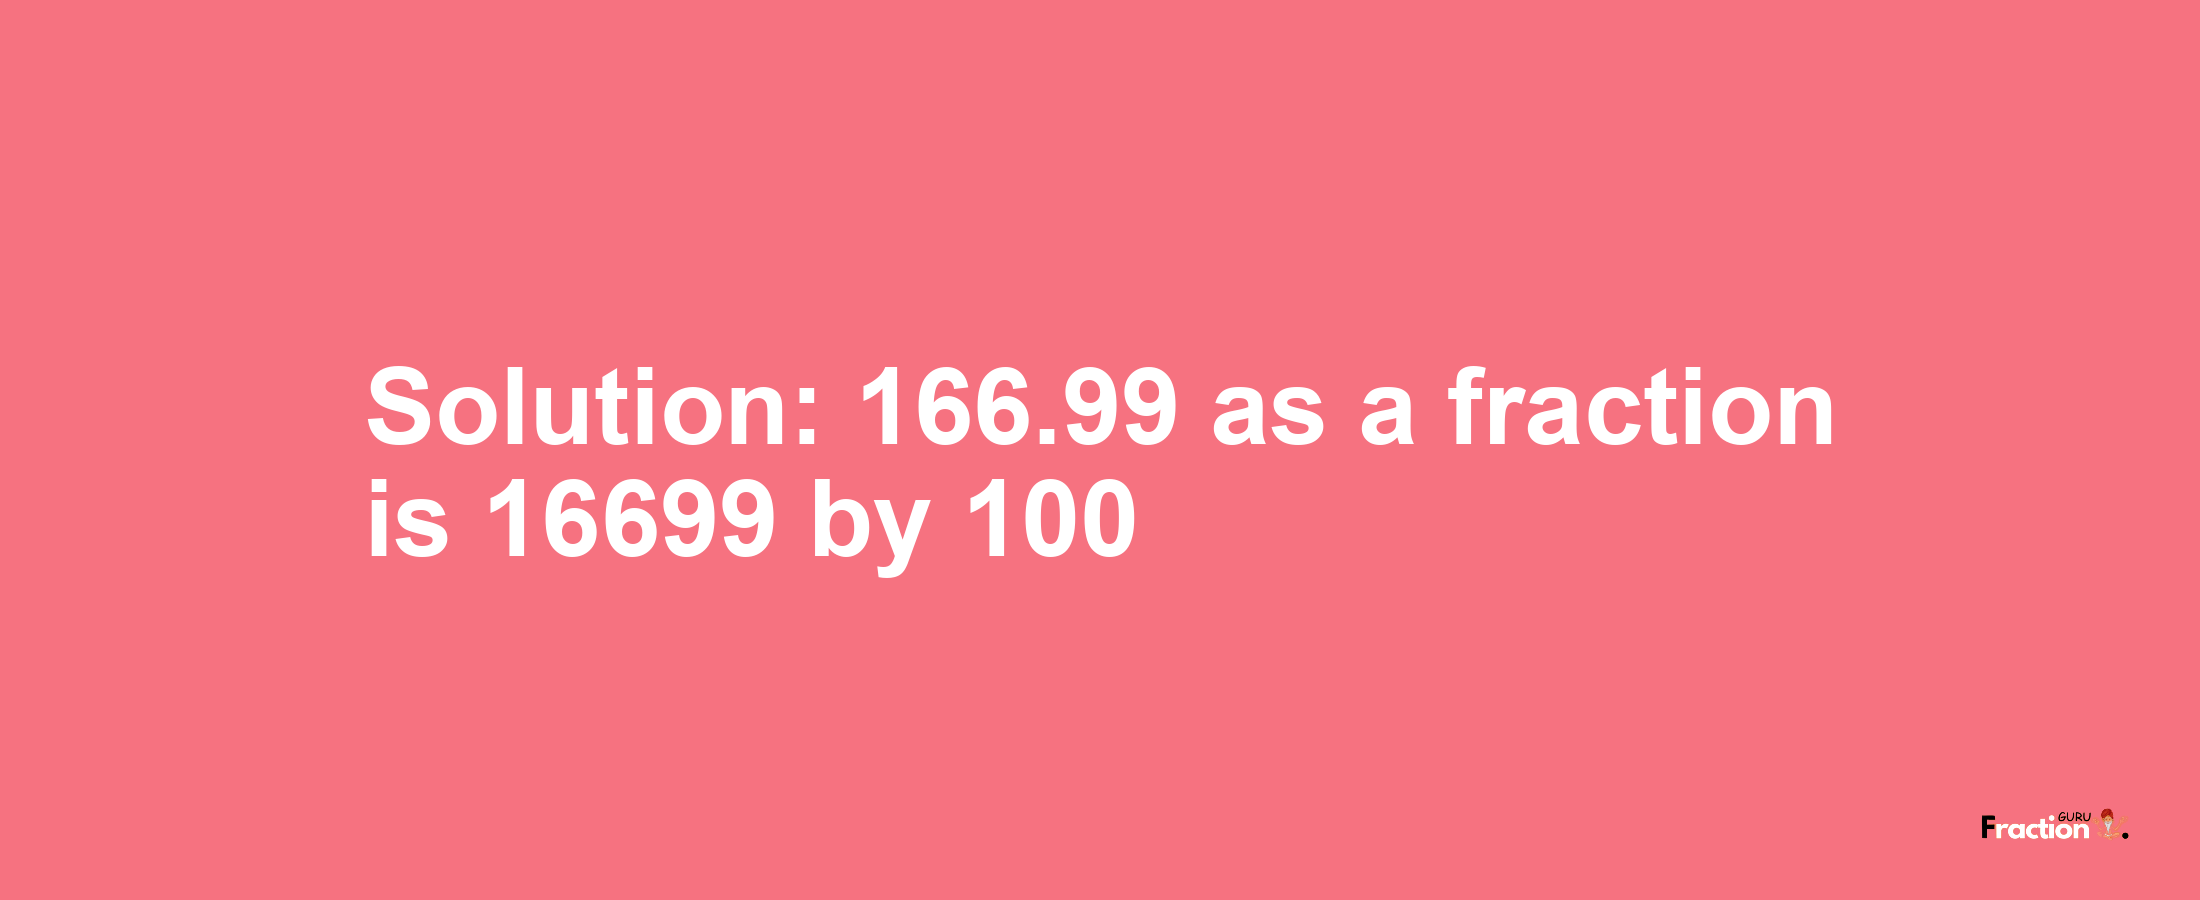 Solution:166.99 as a fraction is 16699/100